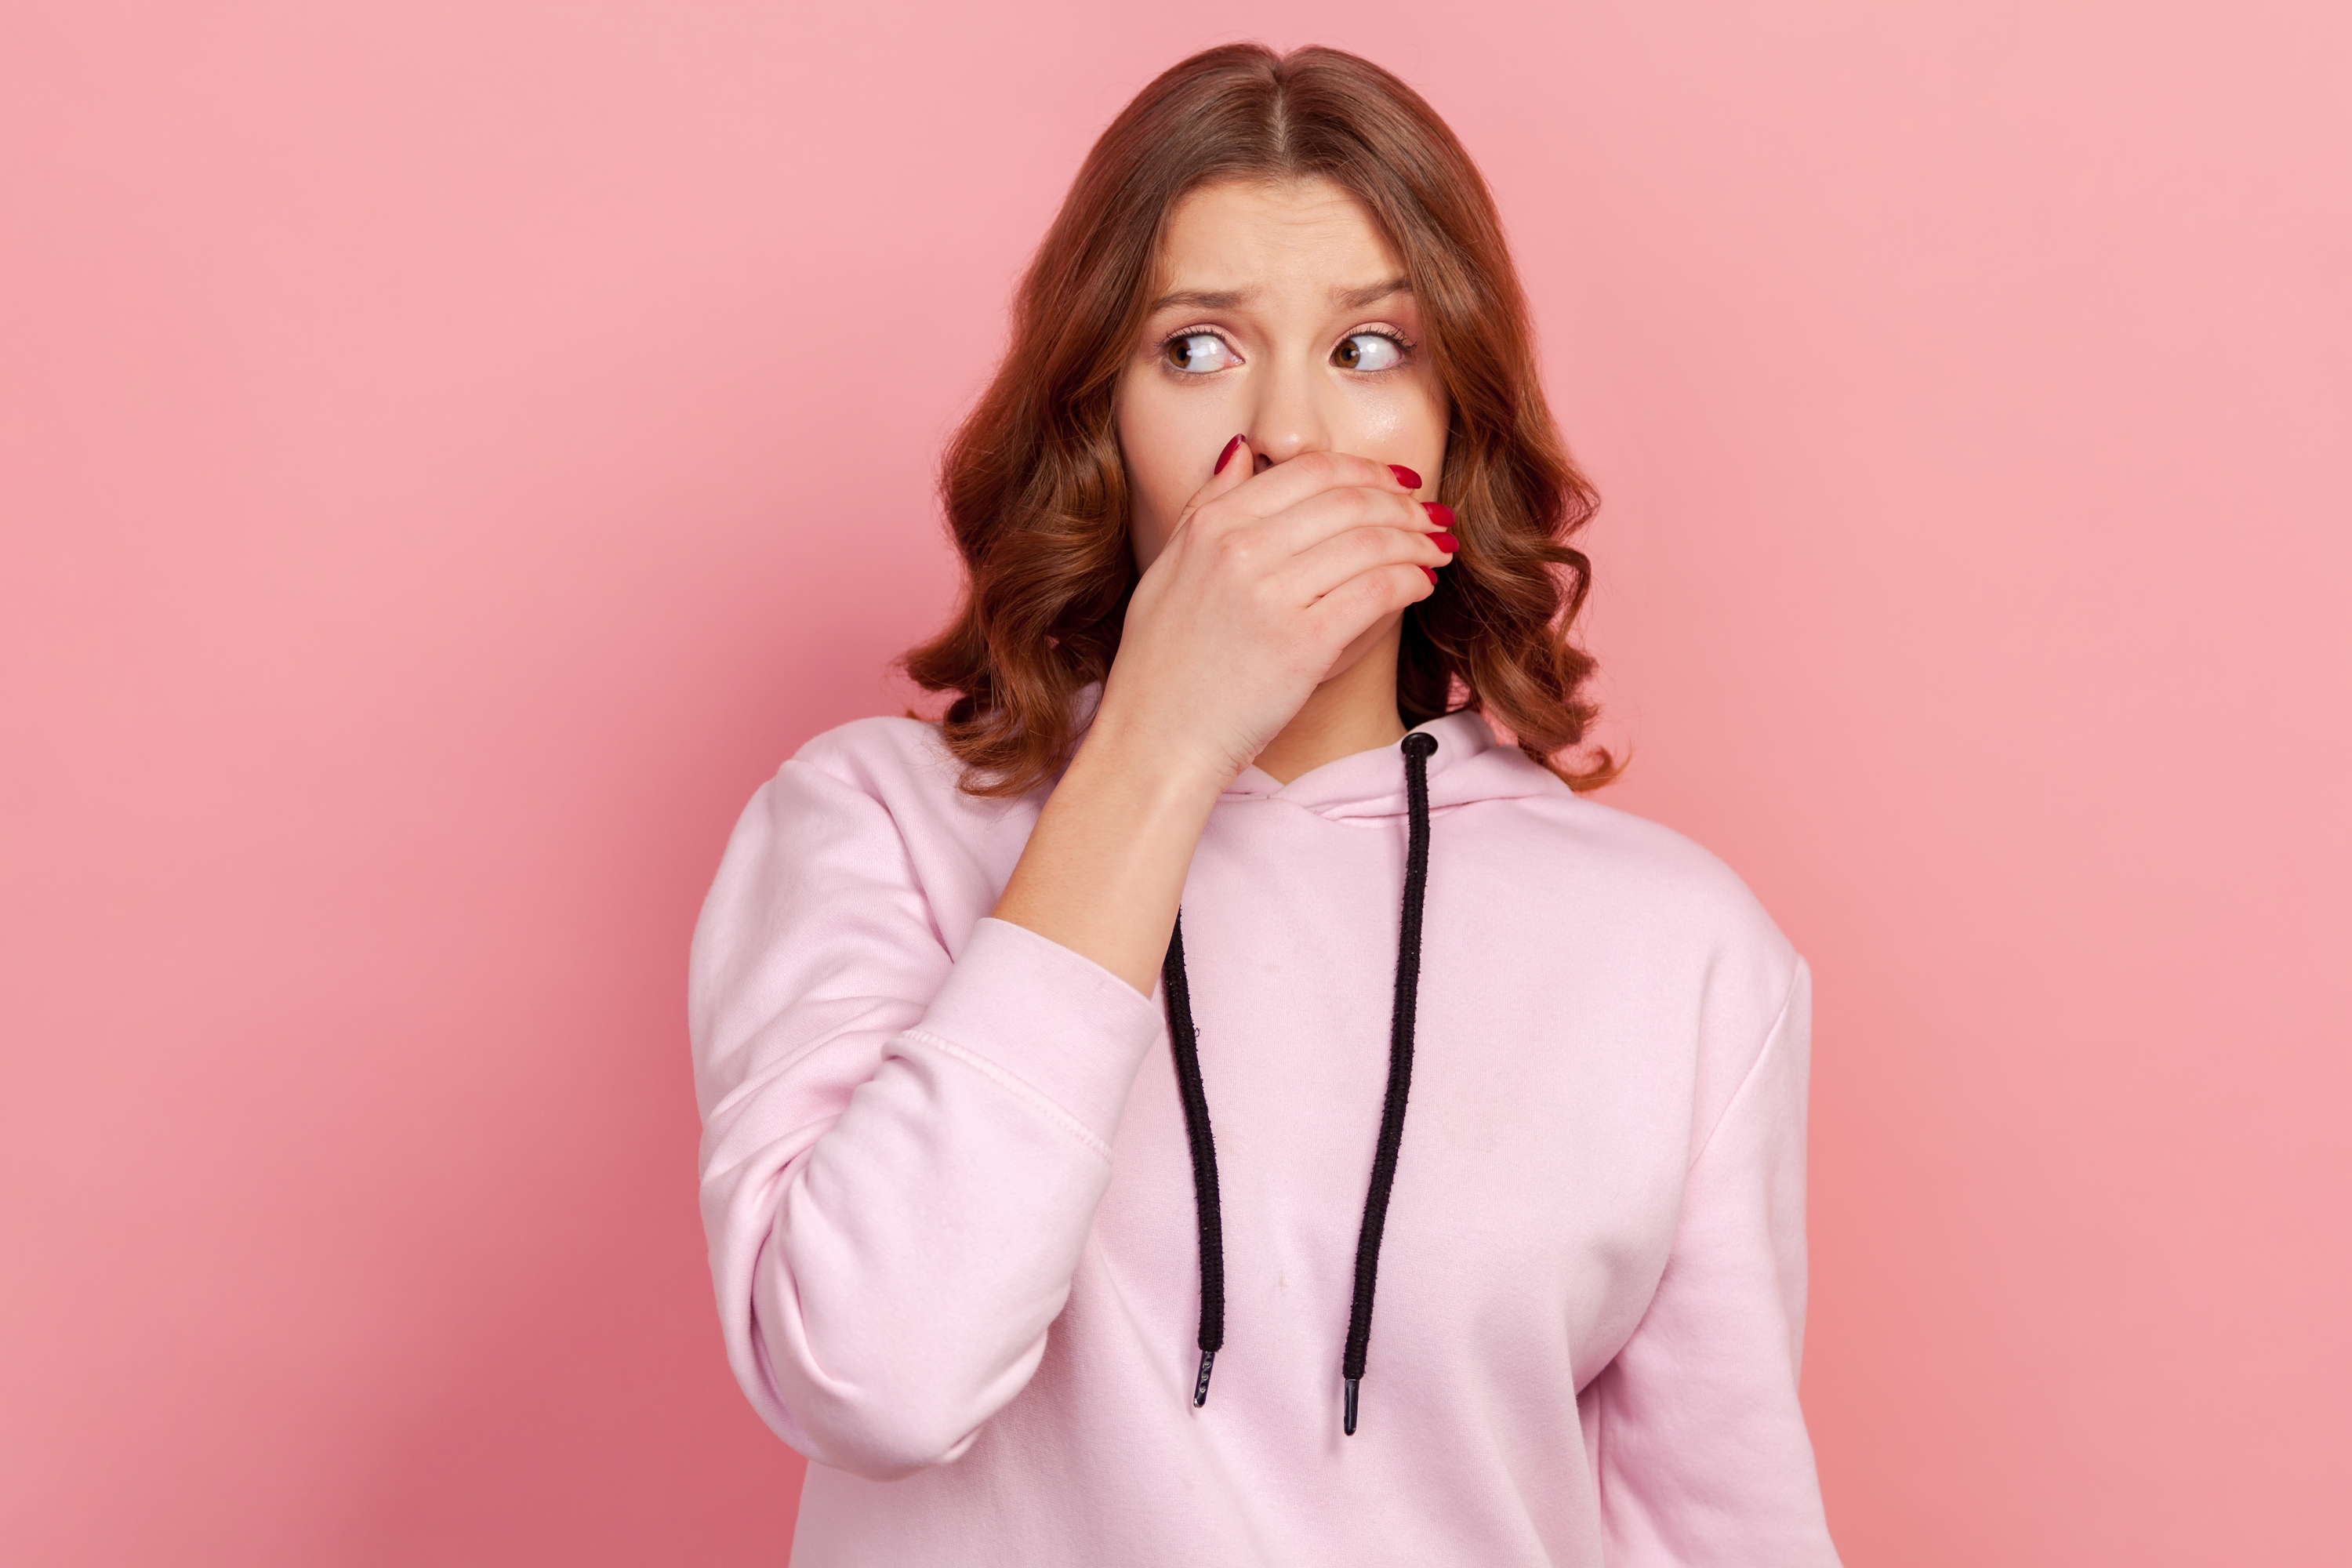 Vaginal odor whats normal and whats not University Health Center photo image